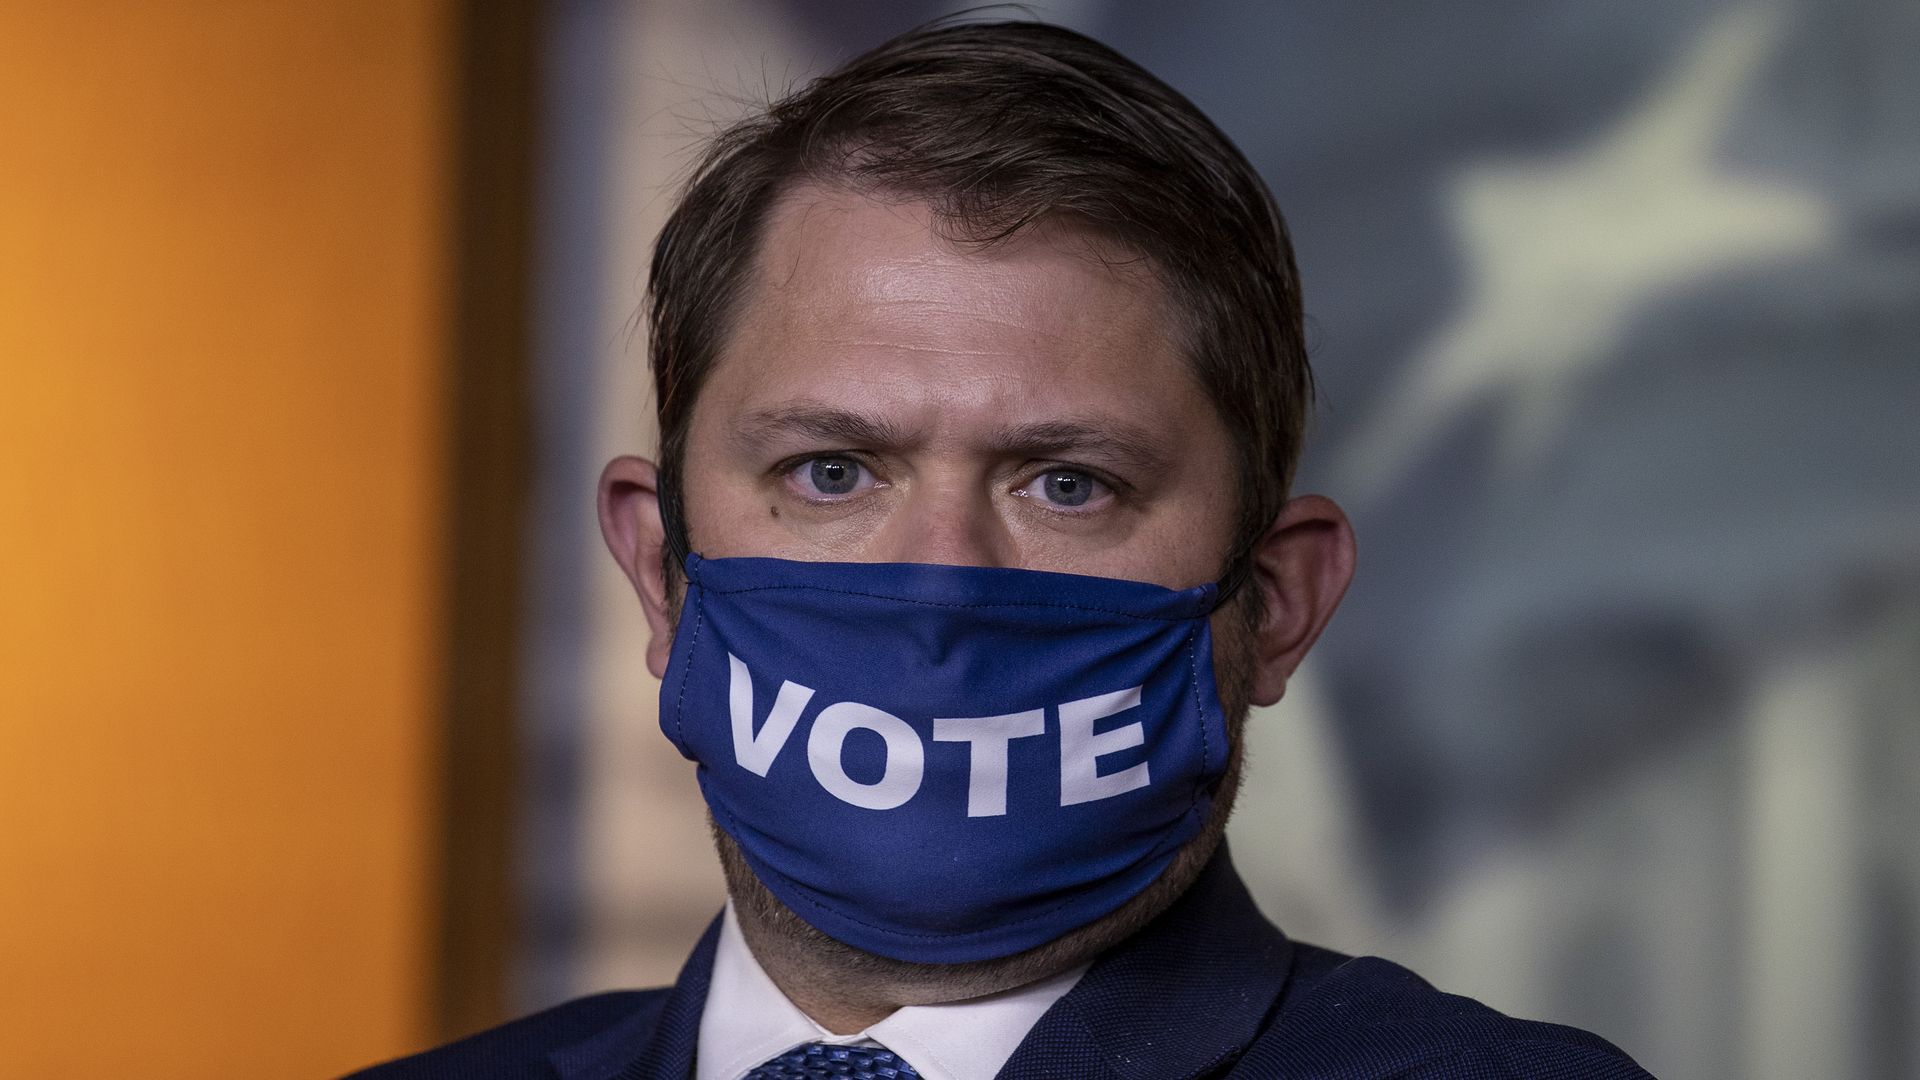 U.S. Rep. Ruben Gallego (D-AZ), with a mask on that reads "vote," attends a press conference on Capitol Hill on June 30, 2020 in Washington, DC. 